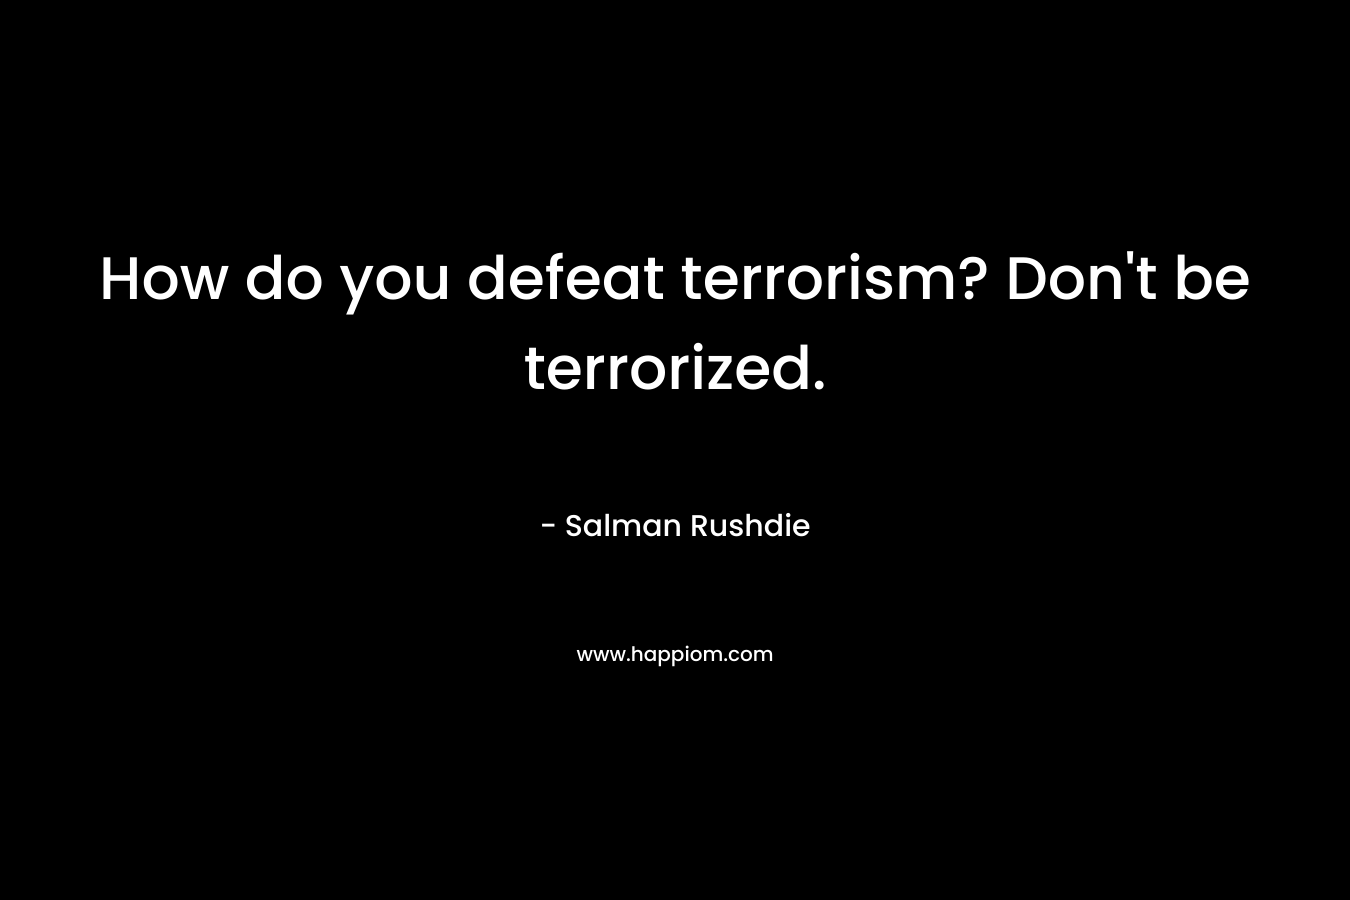 How do you defeat terrorism? Don't be terrorized.